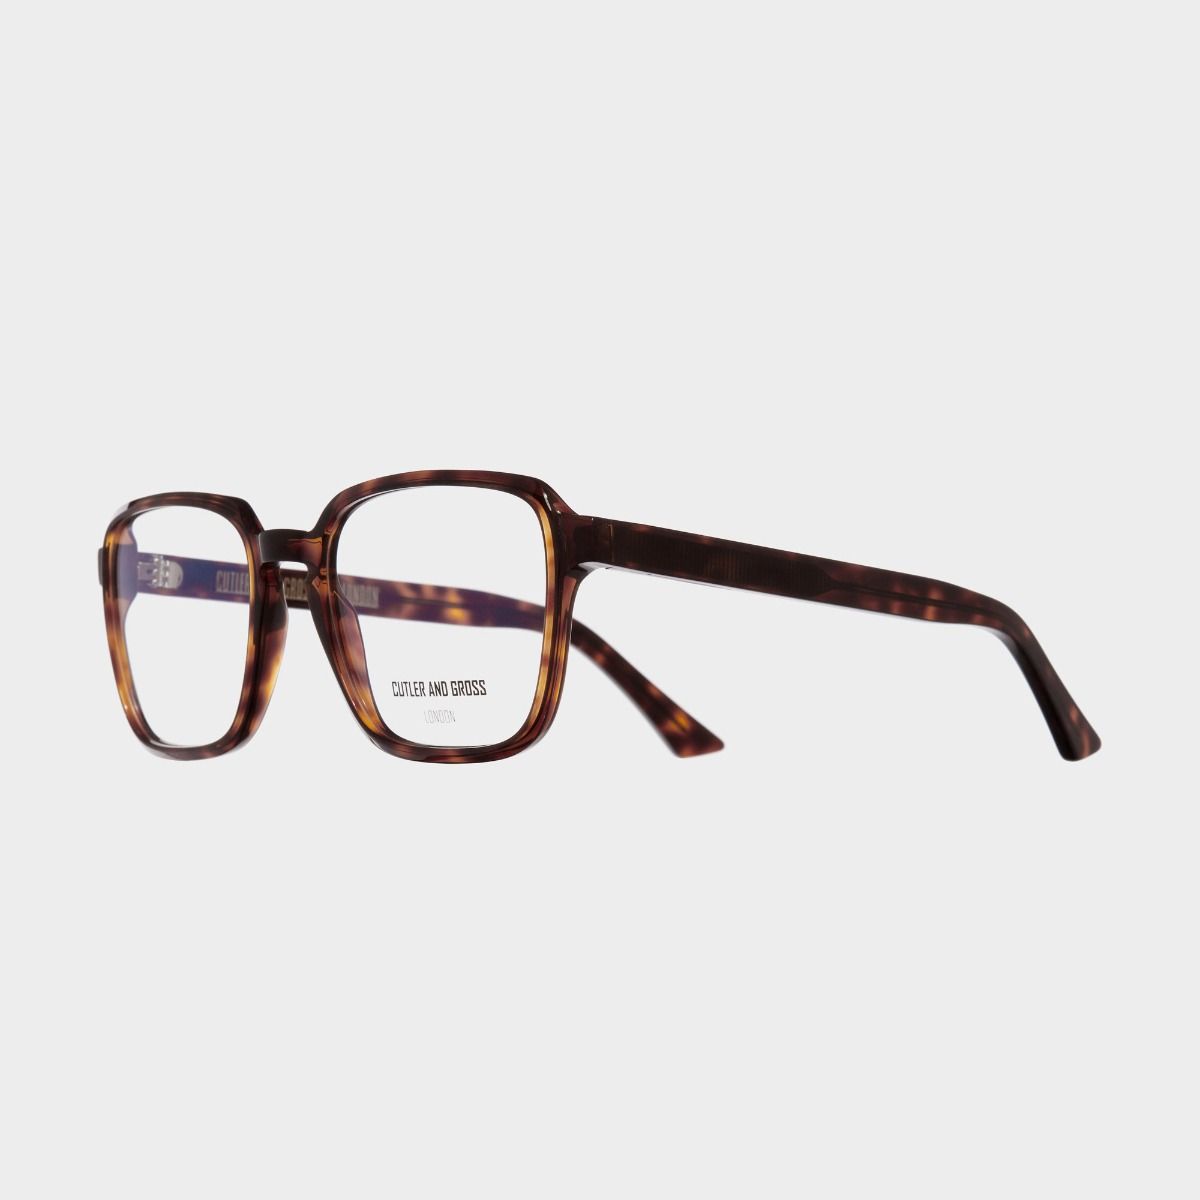 Cutler and Gross, 1361 Optical Square Glasses - Dark Turtle